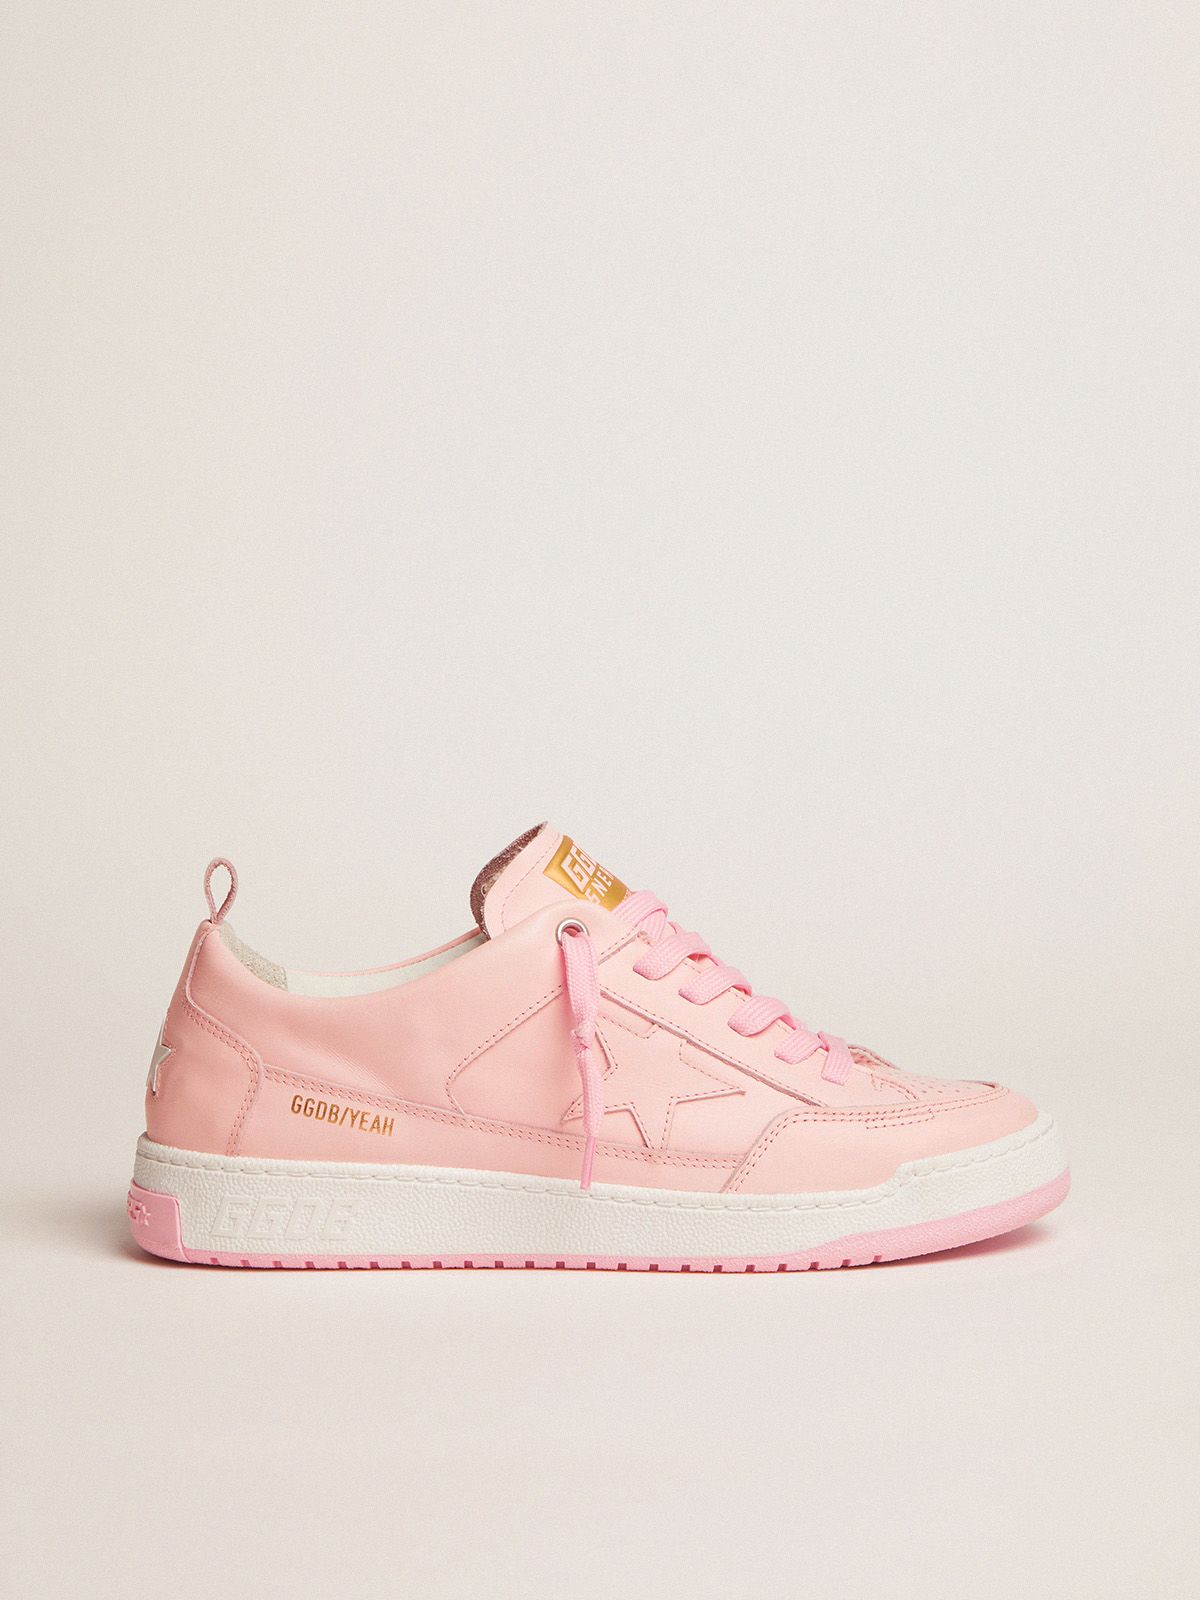 golden goose Yeah sneakers pink in leather pale